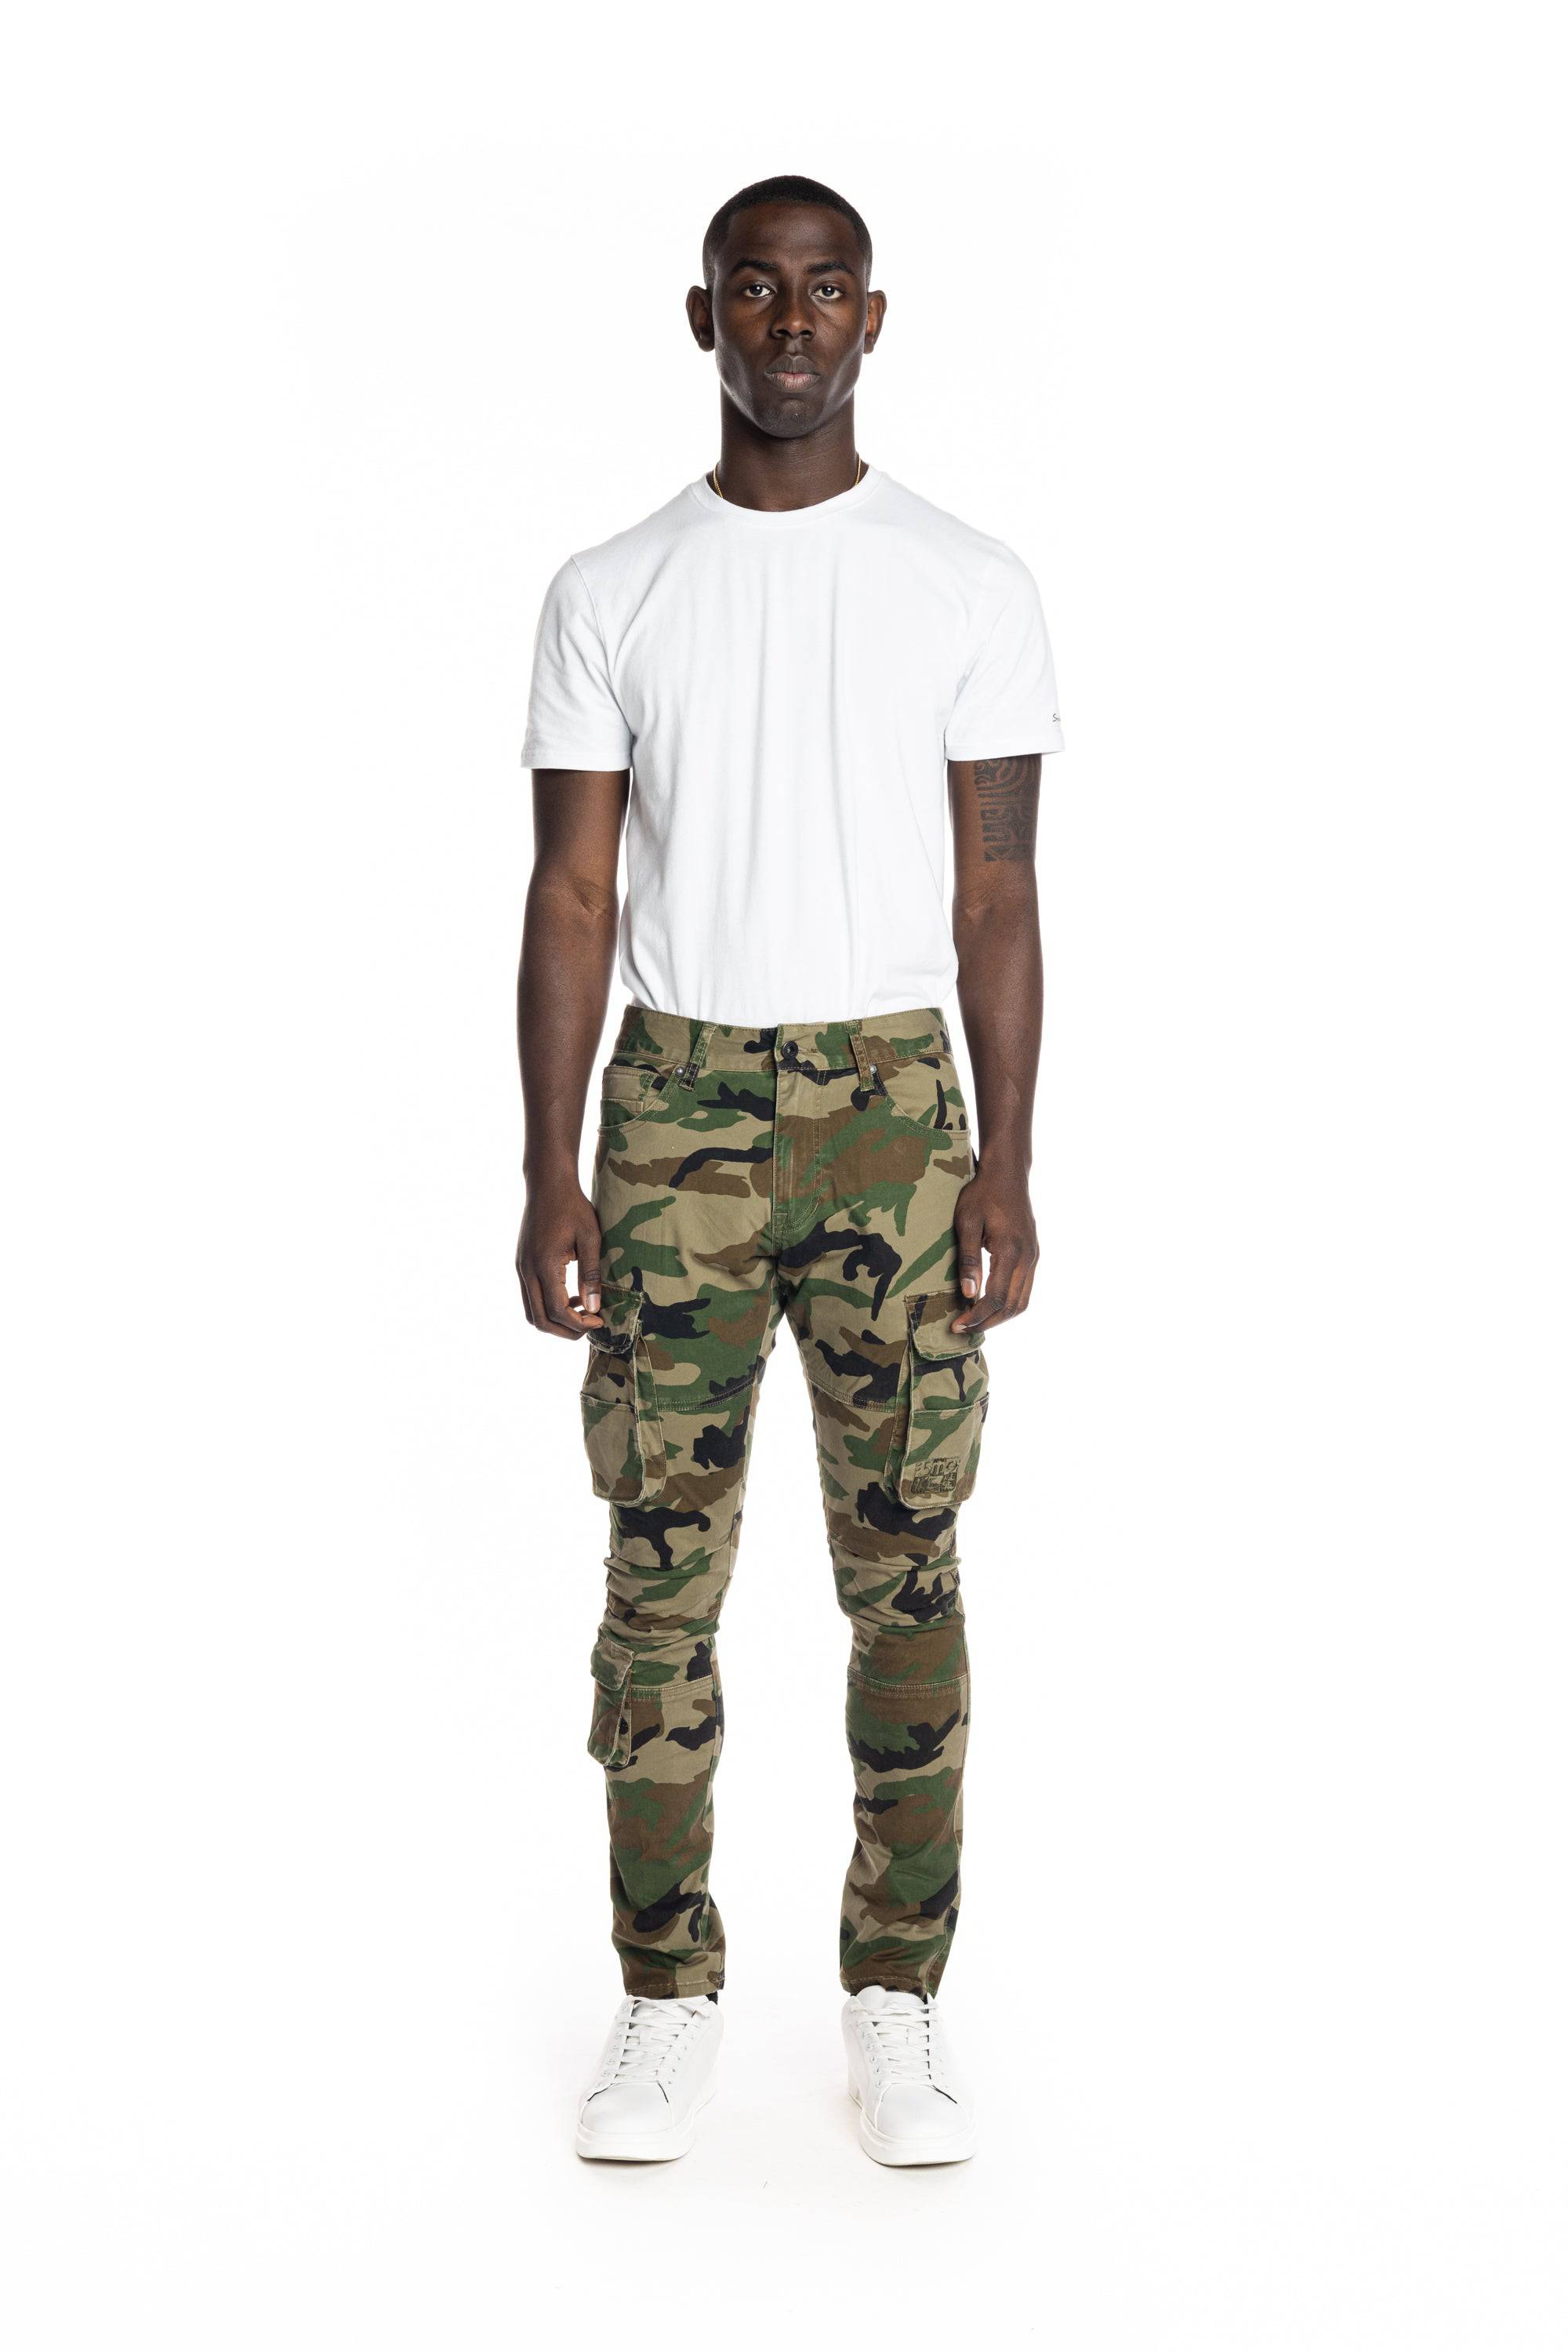 Hfyihgf Men's Casual Relaxed Fit Cargo Pants Military Camo Pants Combat  Work Pants with Multi-Pockets(Gray,3XL) - Walmart.com